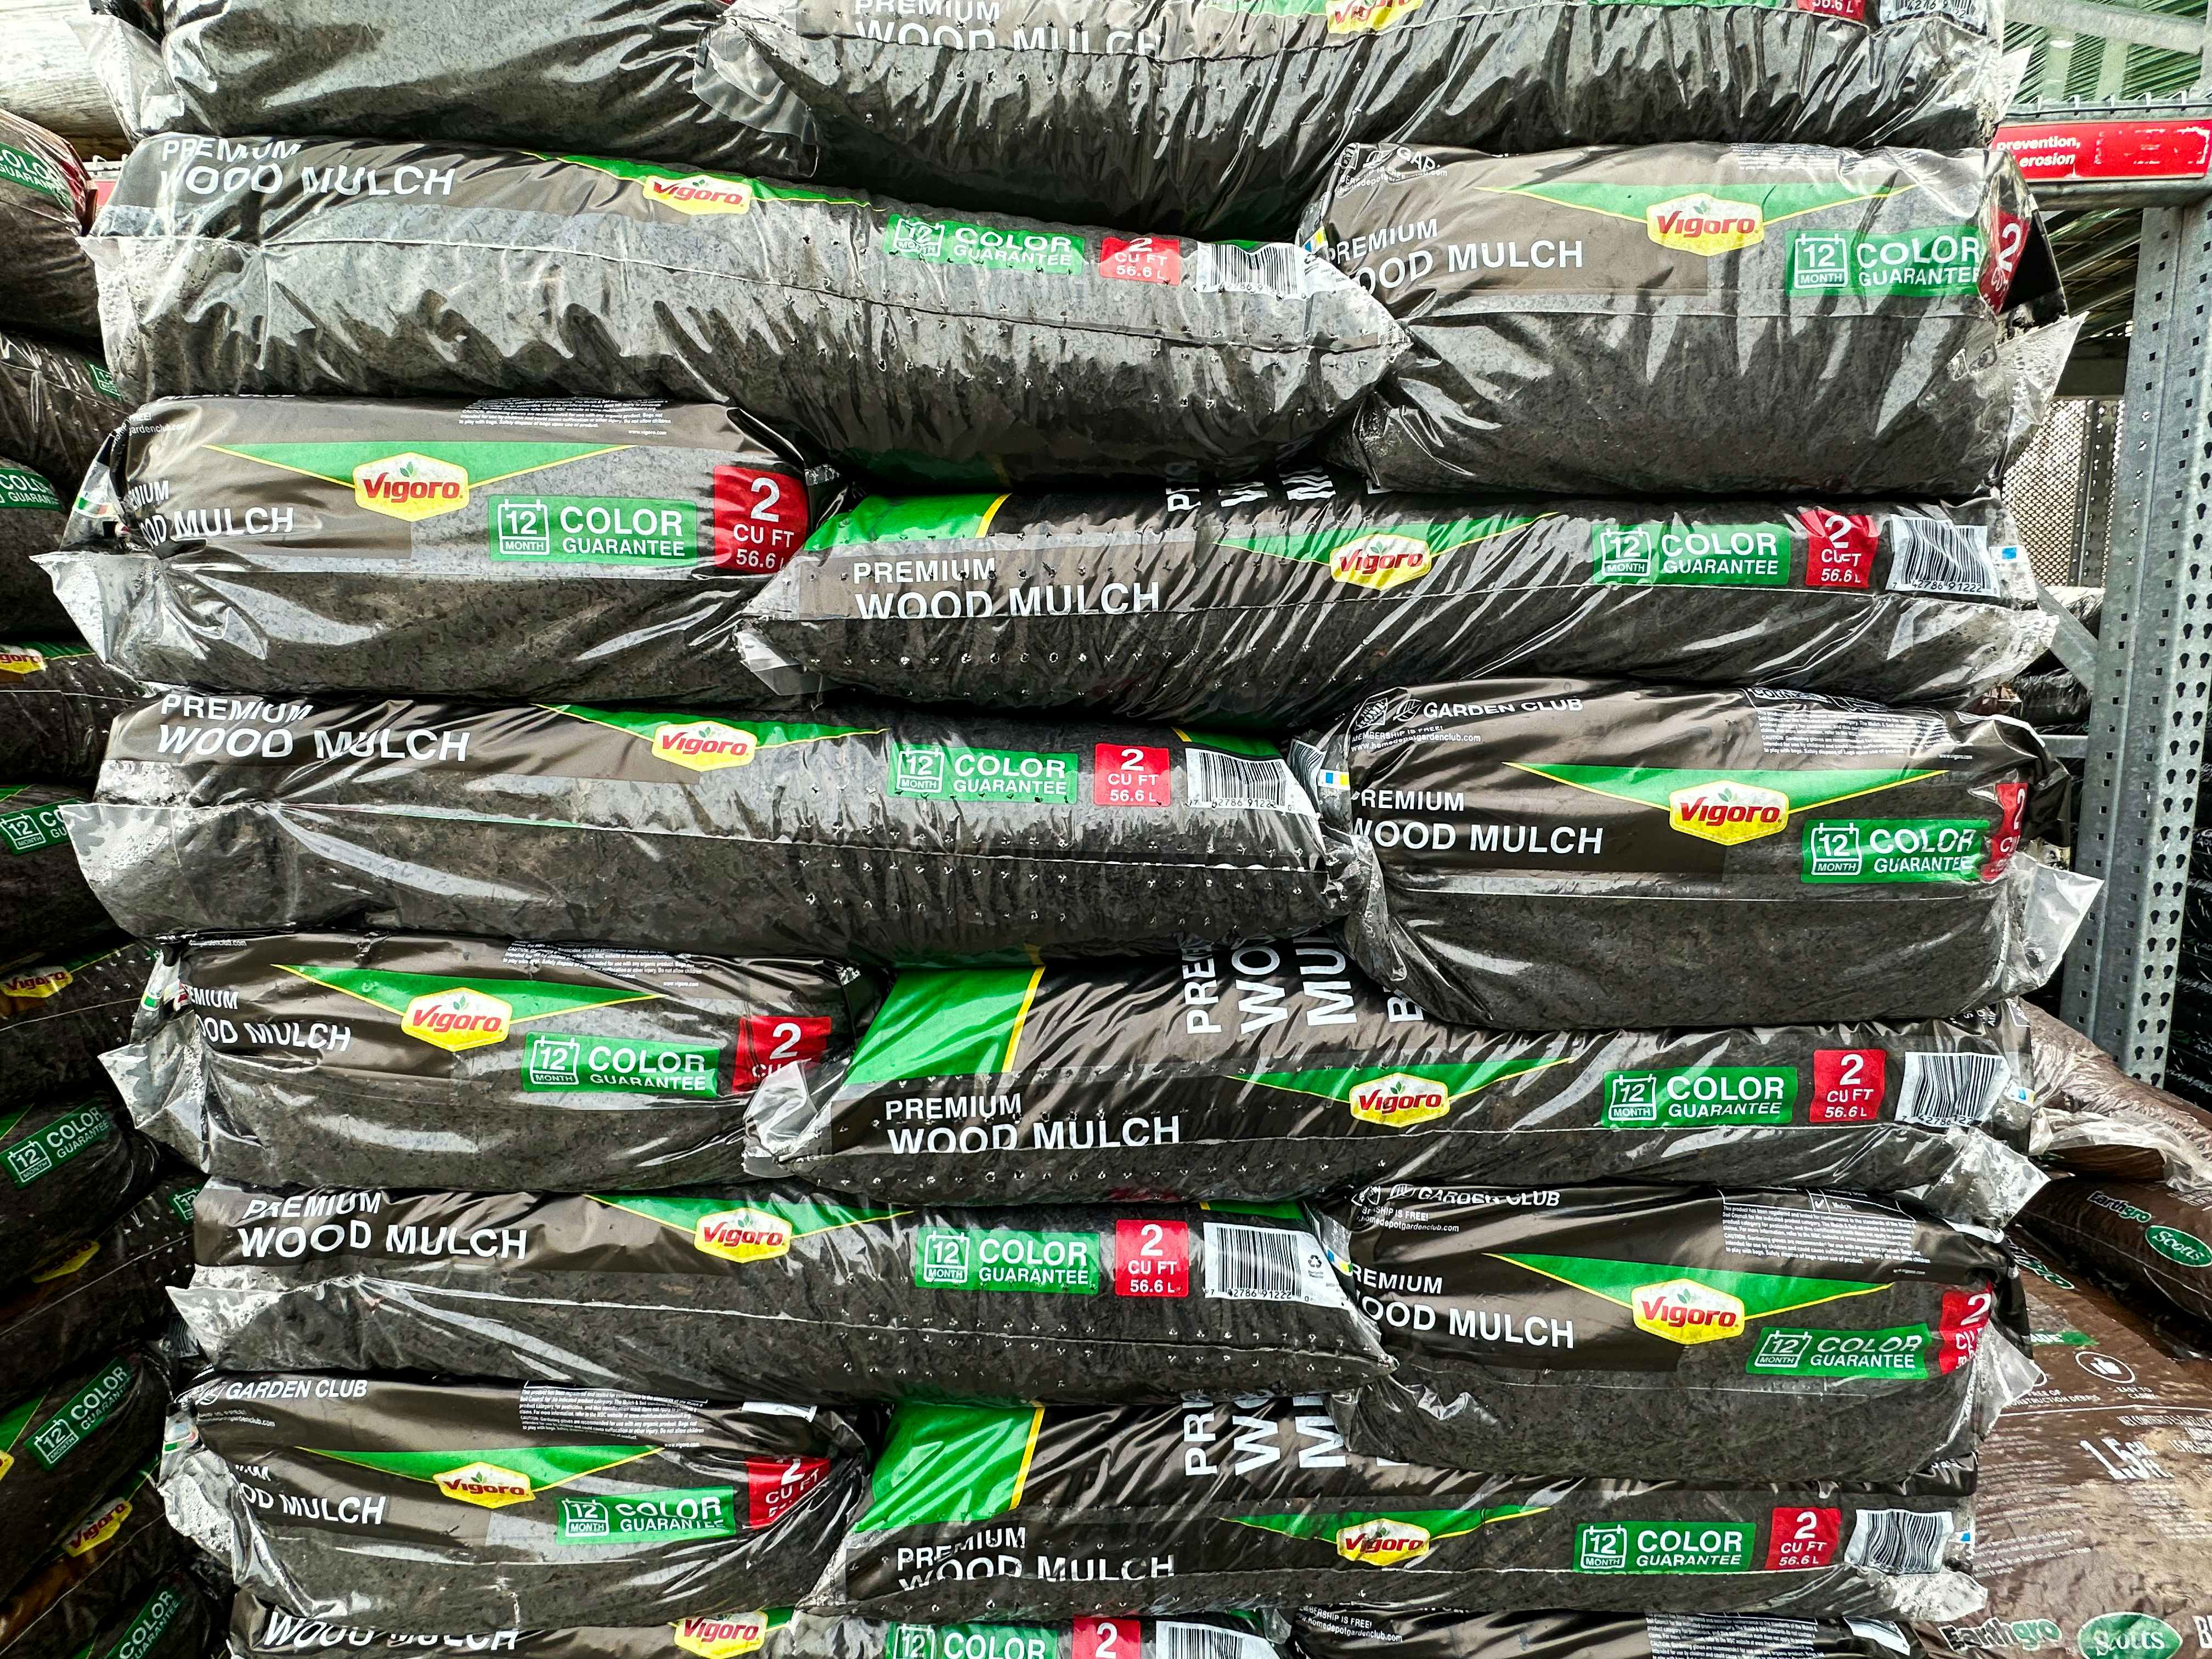 Bags of Vigoro Premium Wood Mulch stacked on top of one another at the Home Depot garden center